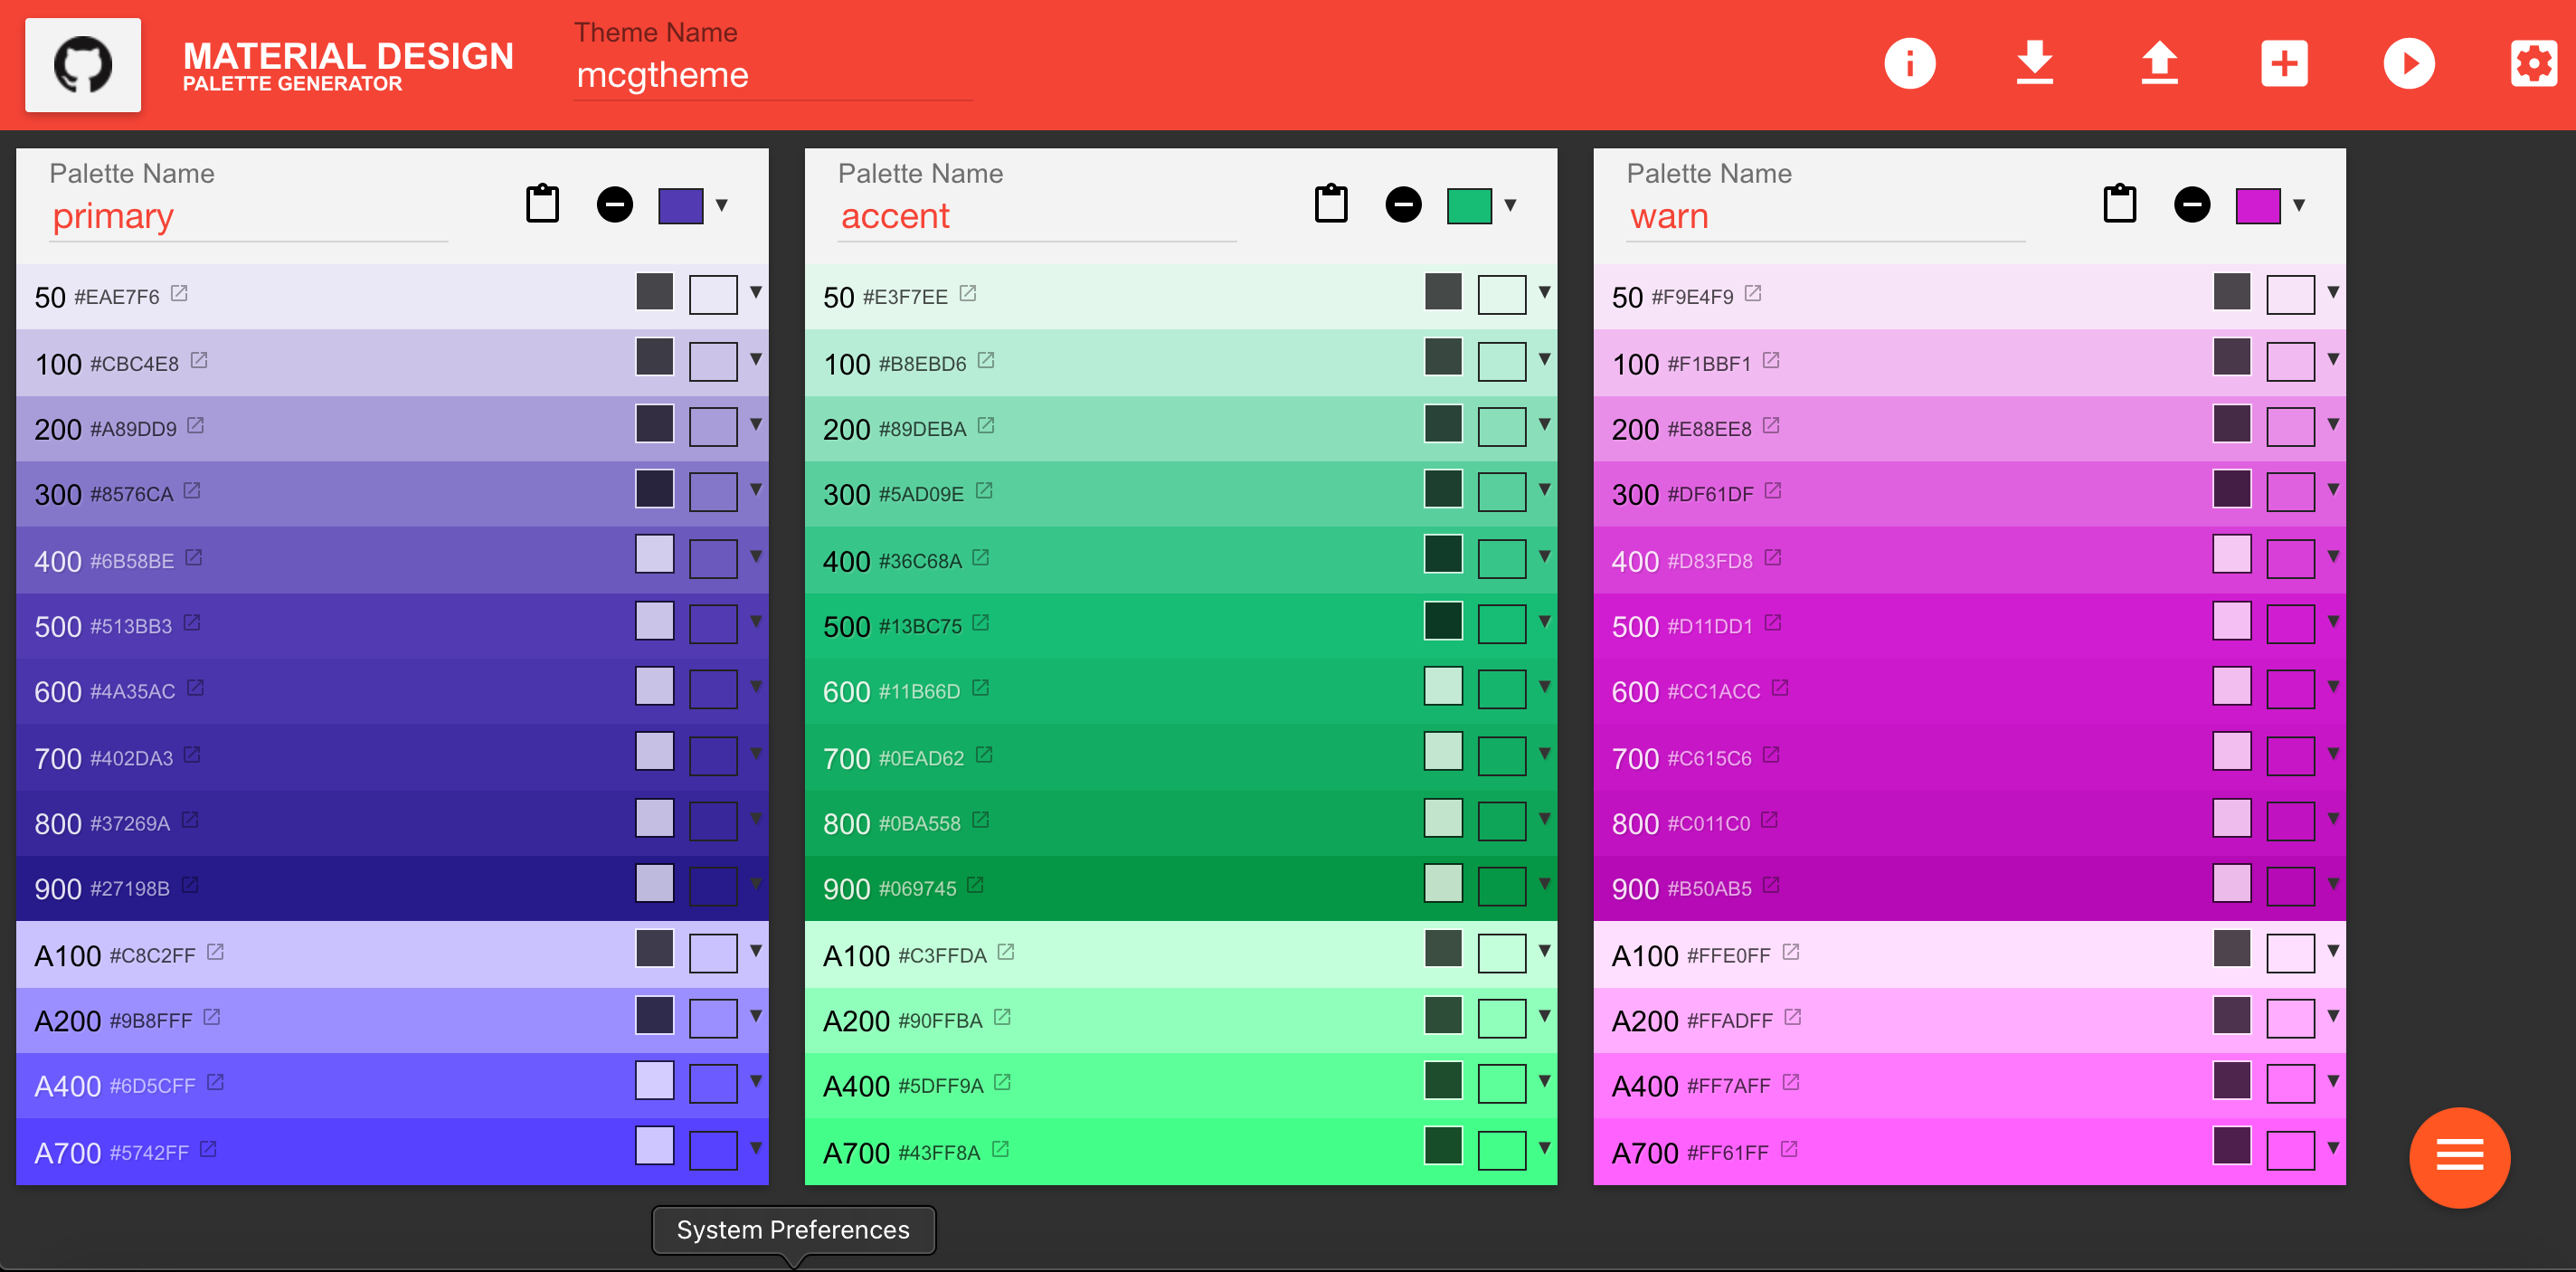 Material design palette with color choices